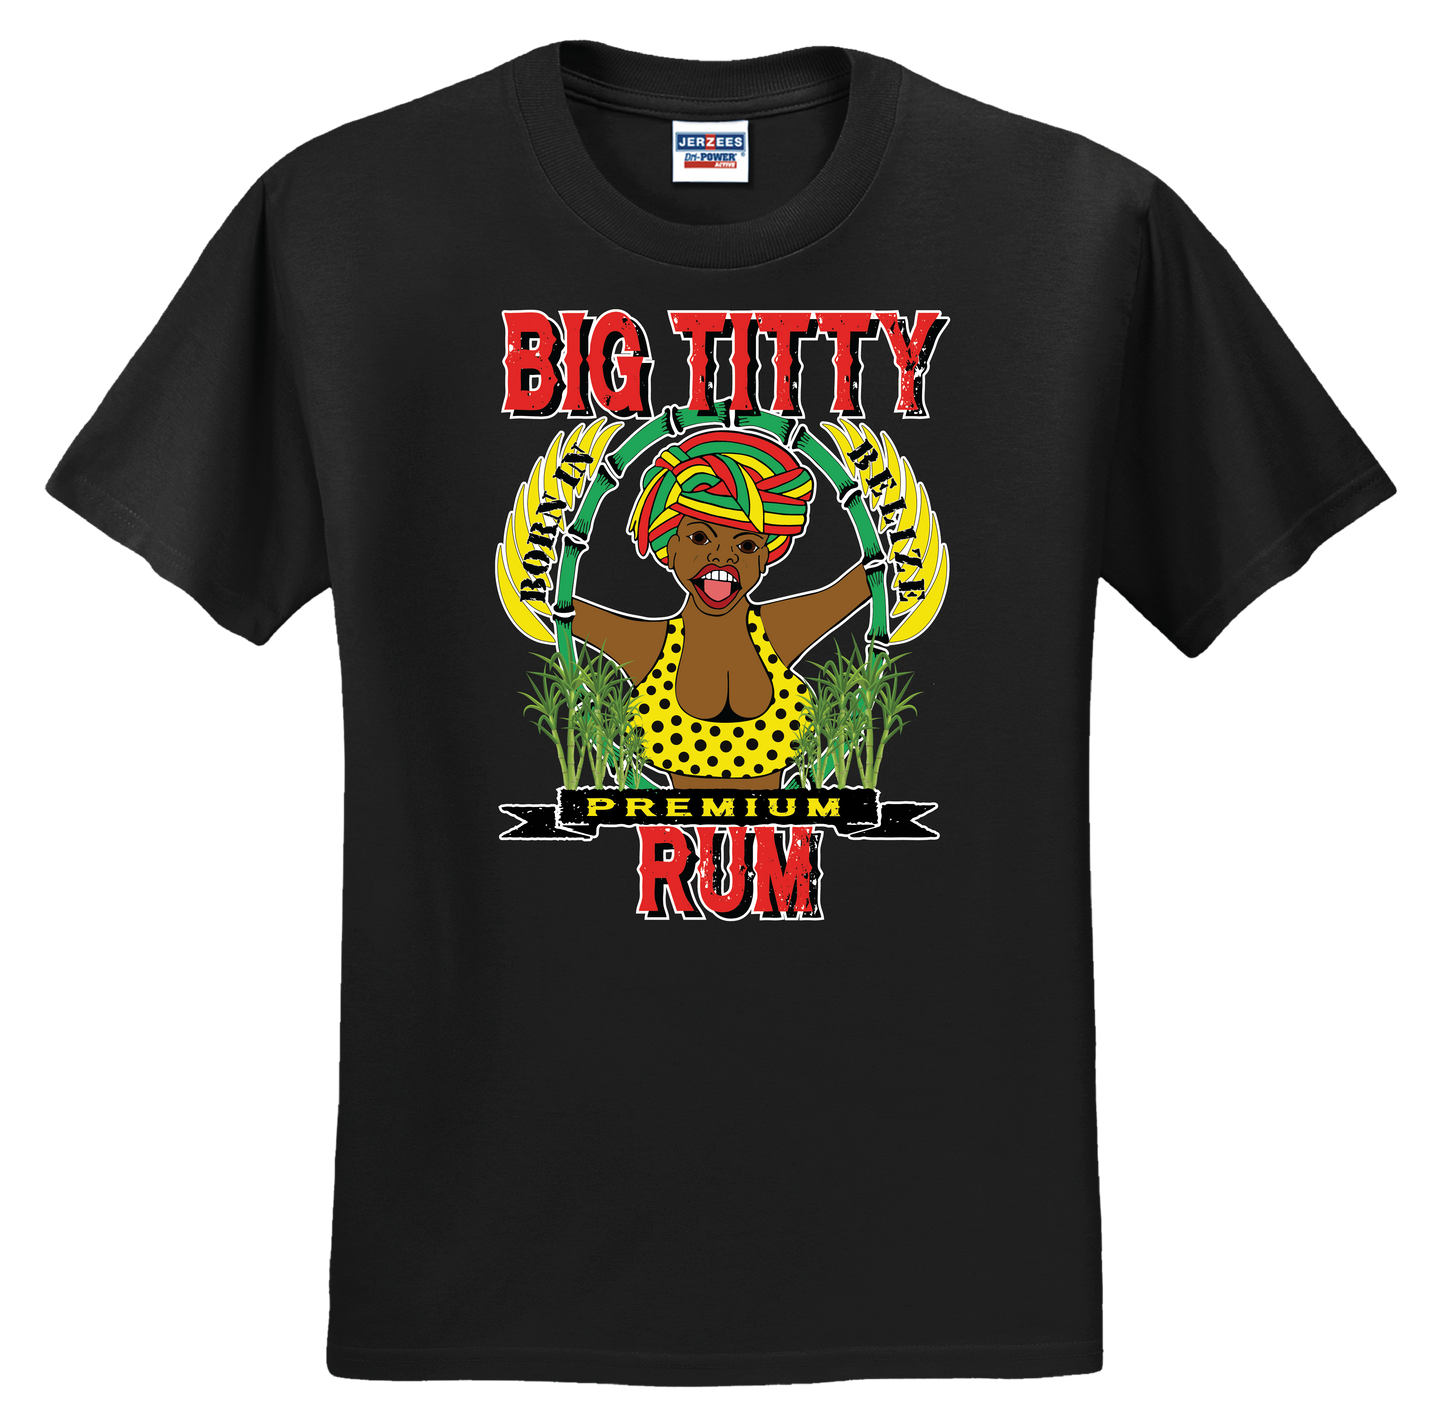 Big Titty Rum T shirt - Large logo on front